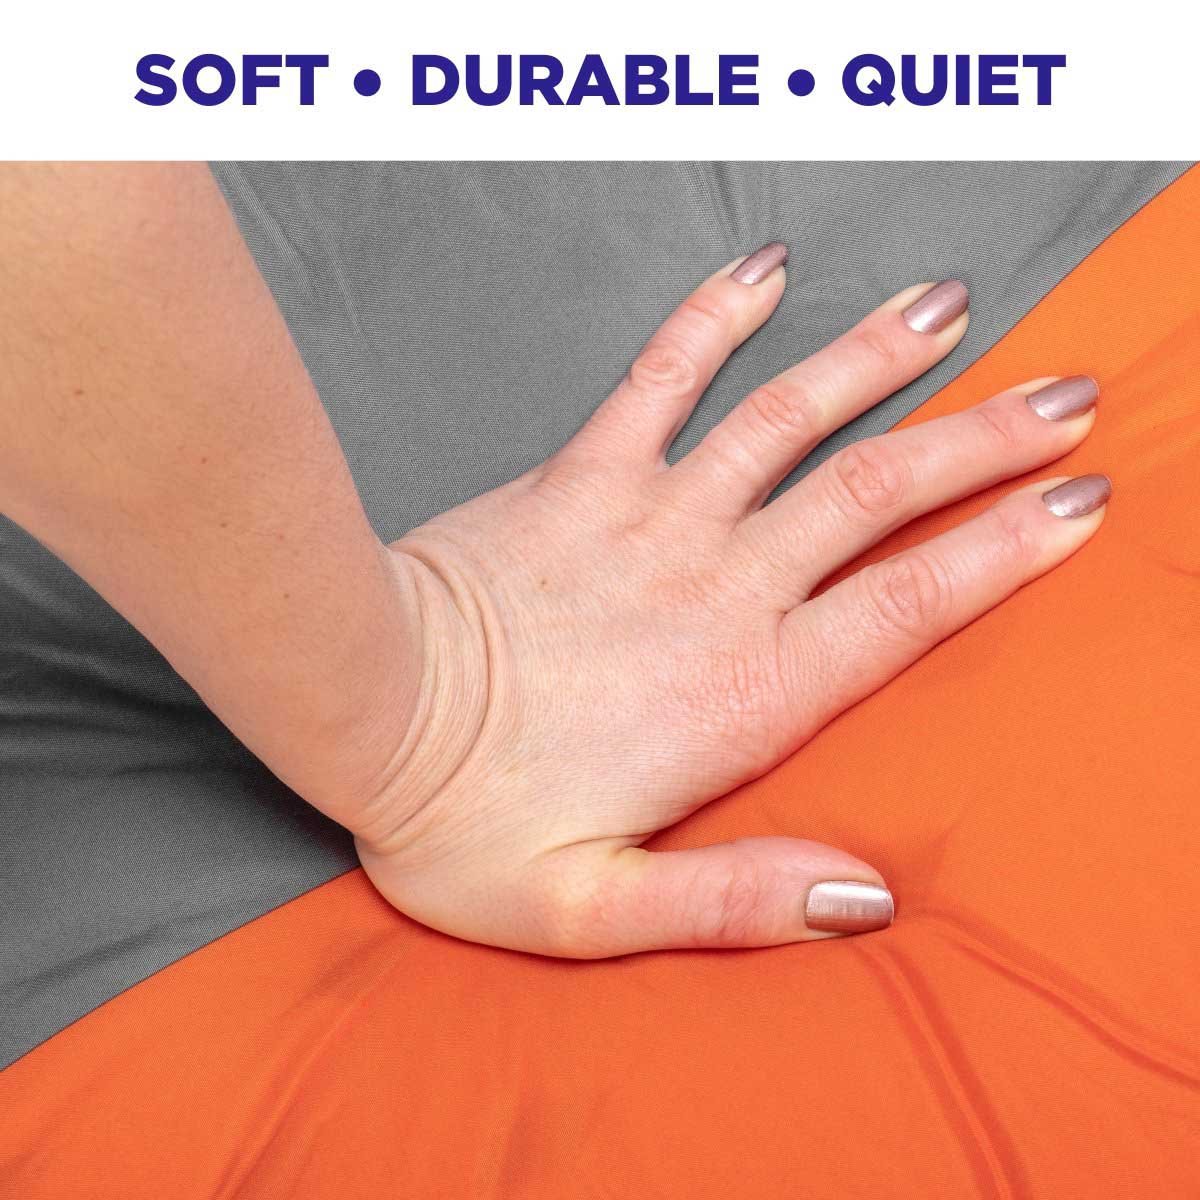 Orange Self Inflating Sleeping Pad with Pillow is very soft and durable